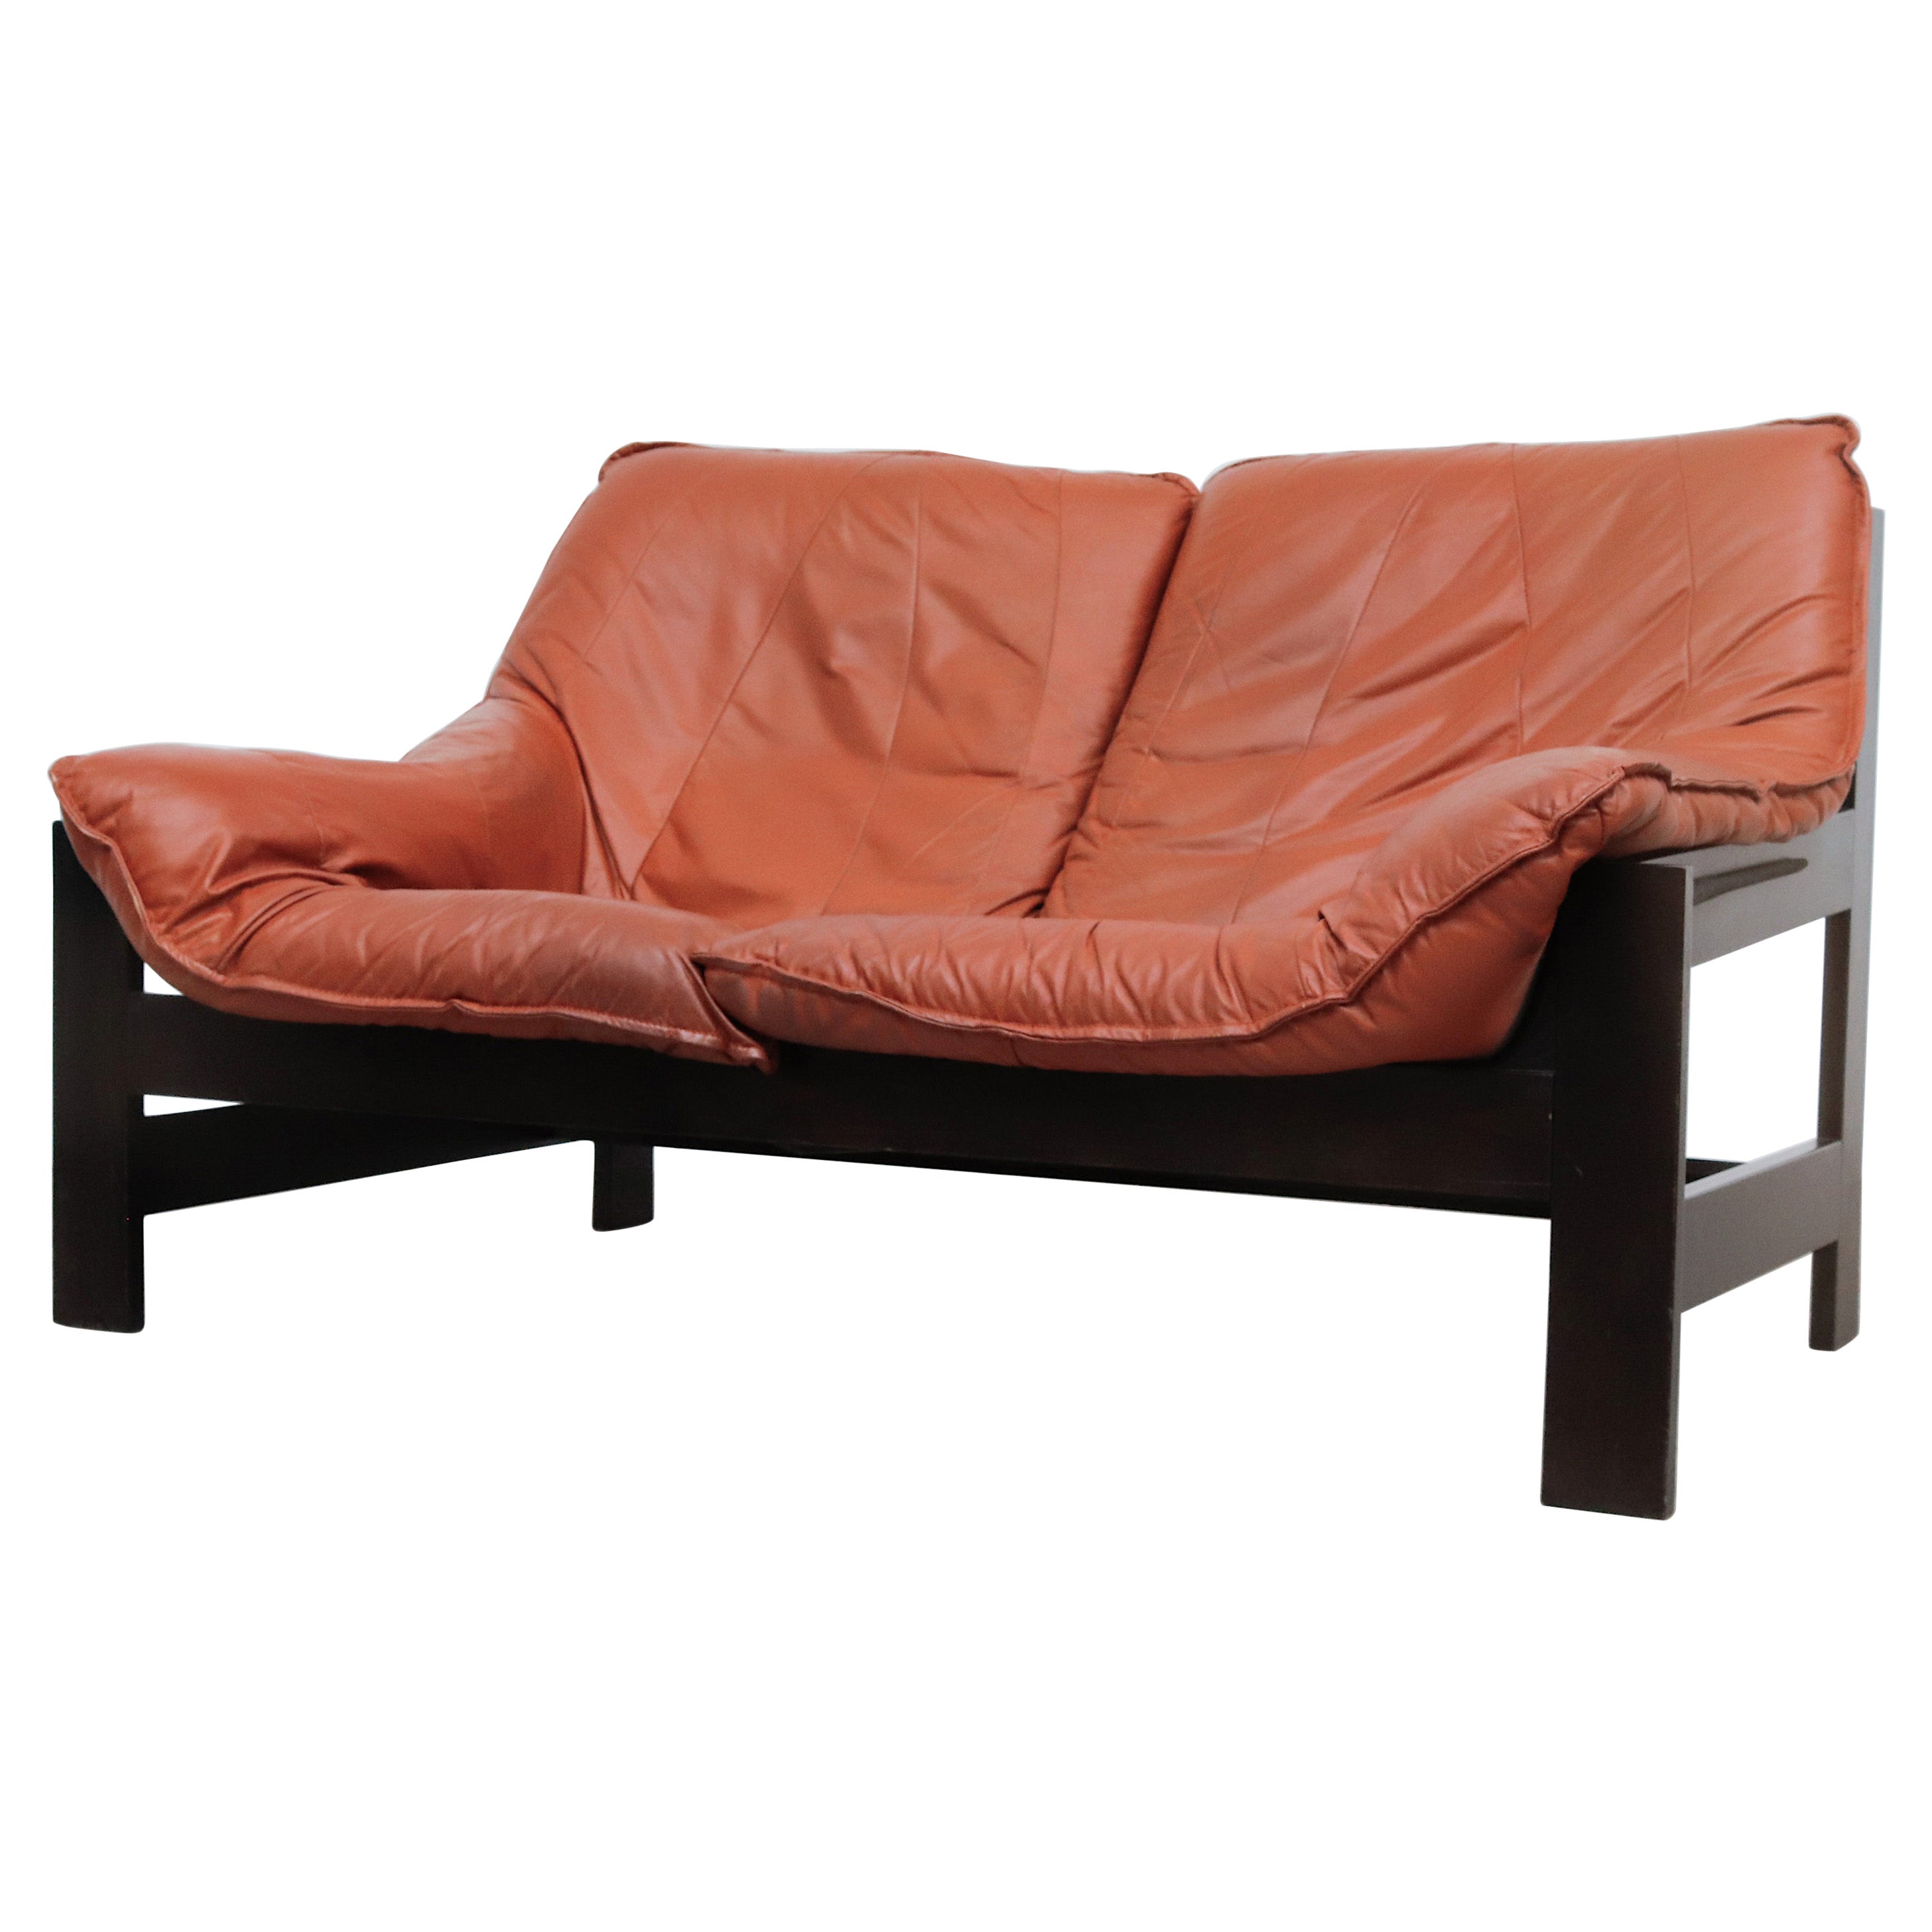 Little LeoLux Loveseat with Coral Leather